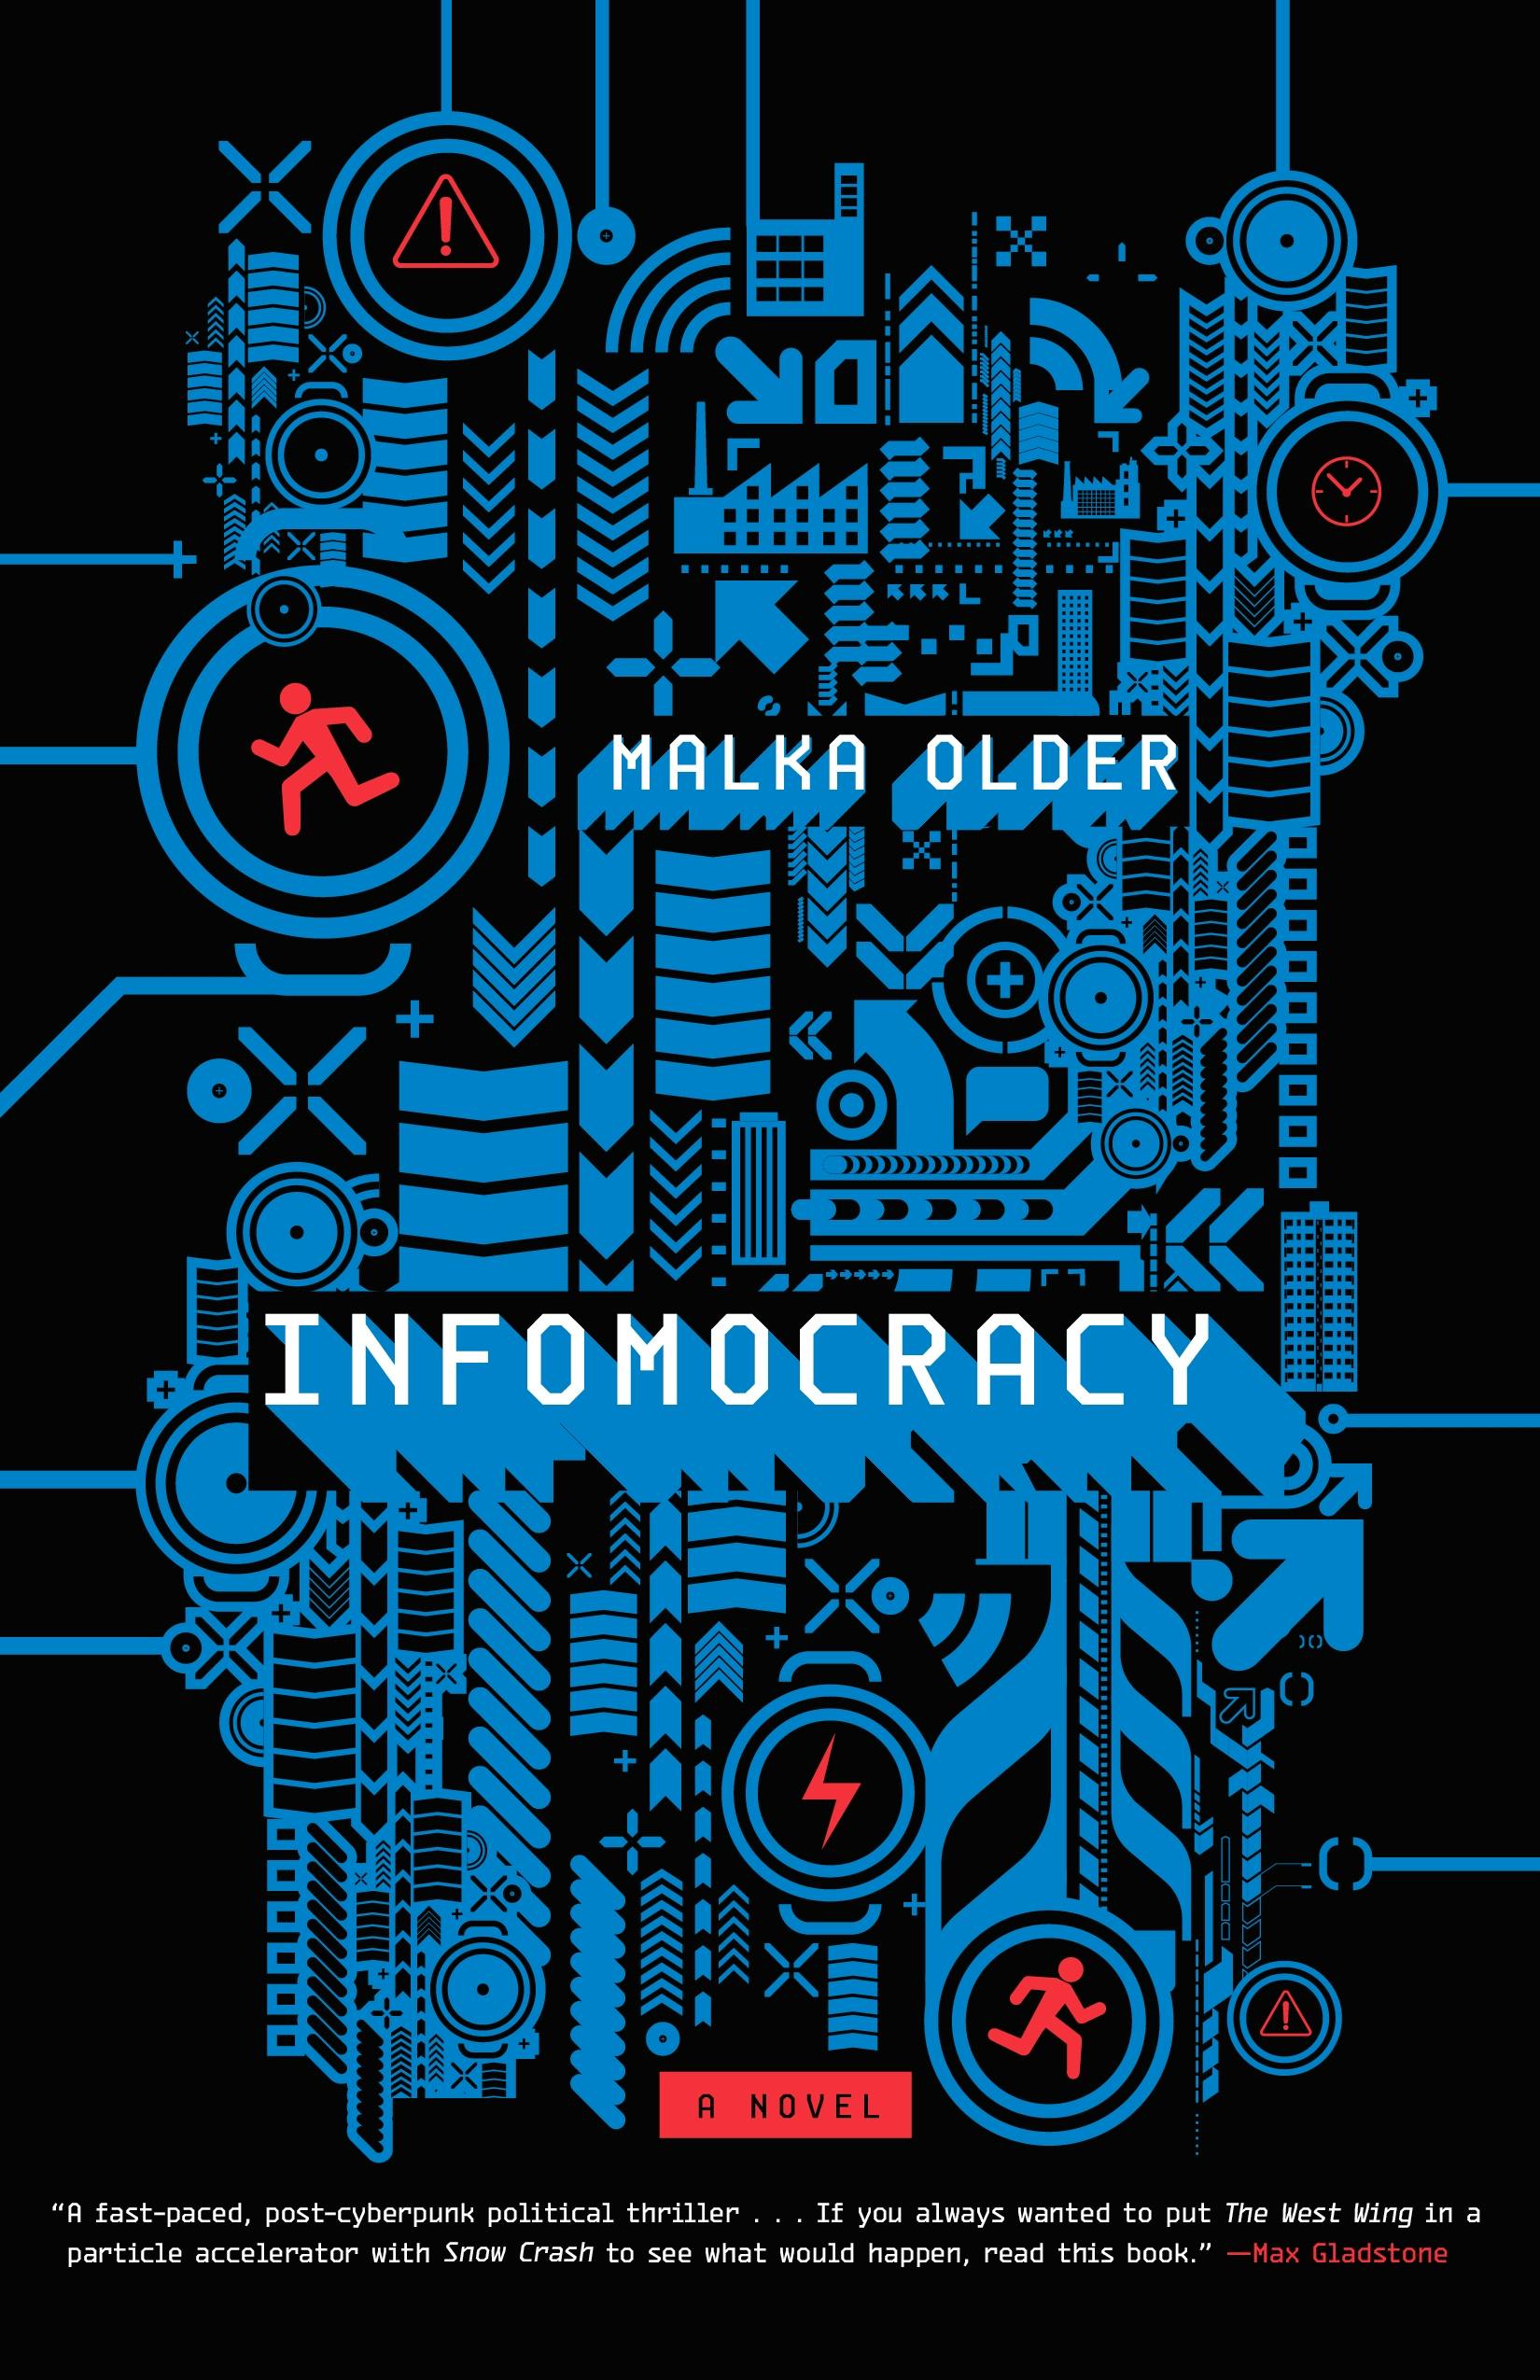 Cover for the book titled as: Infomocracy